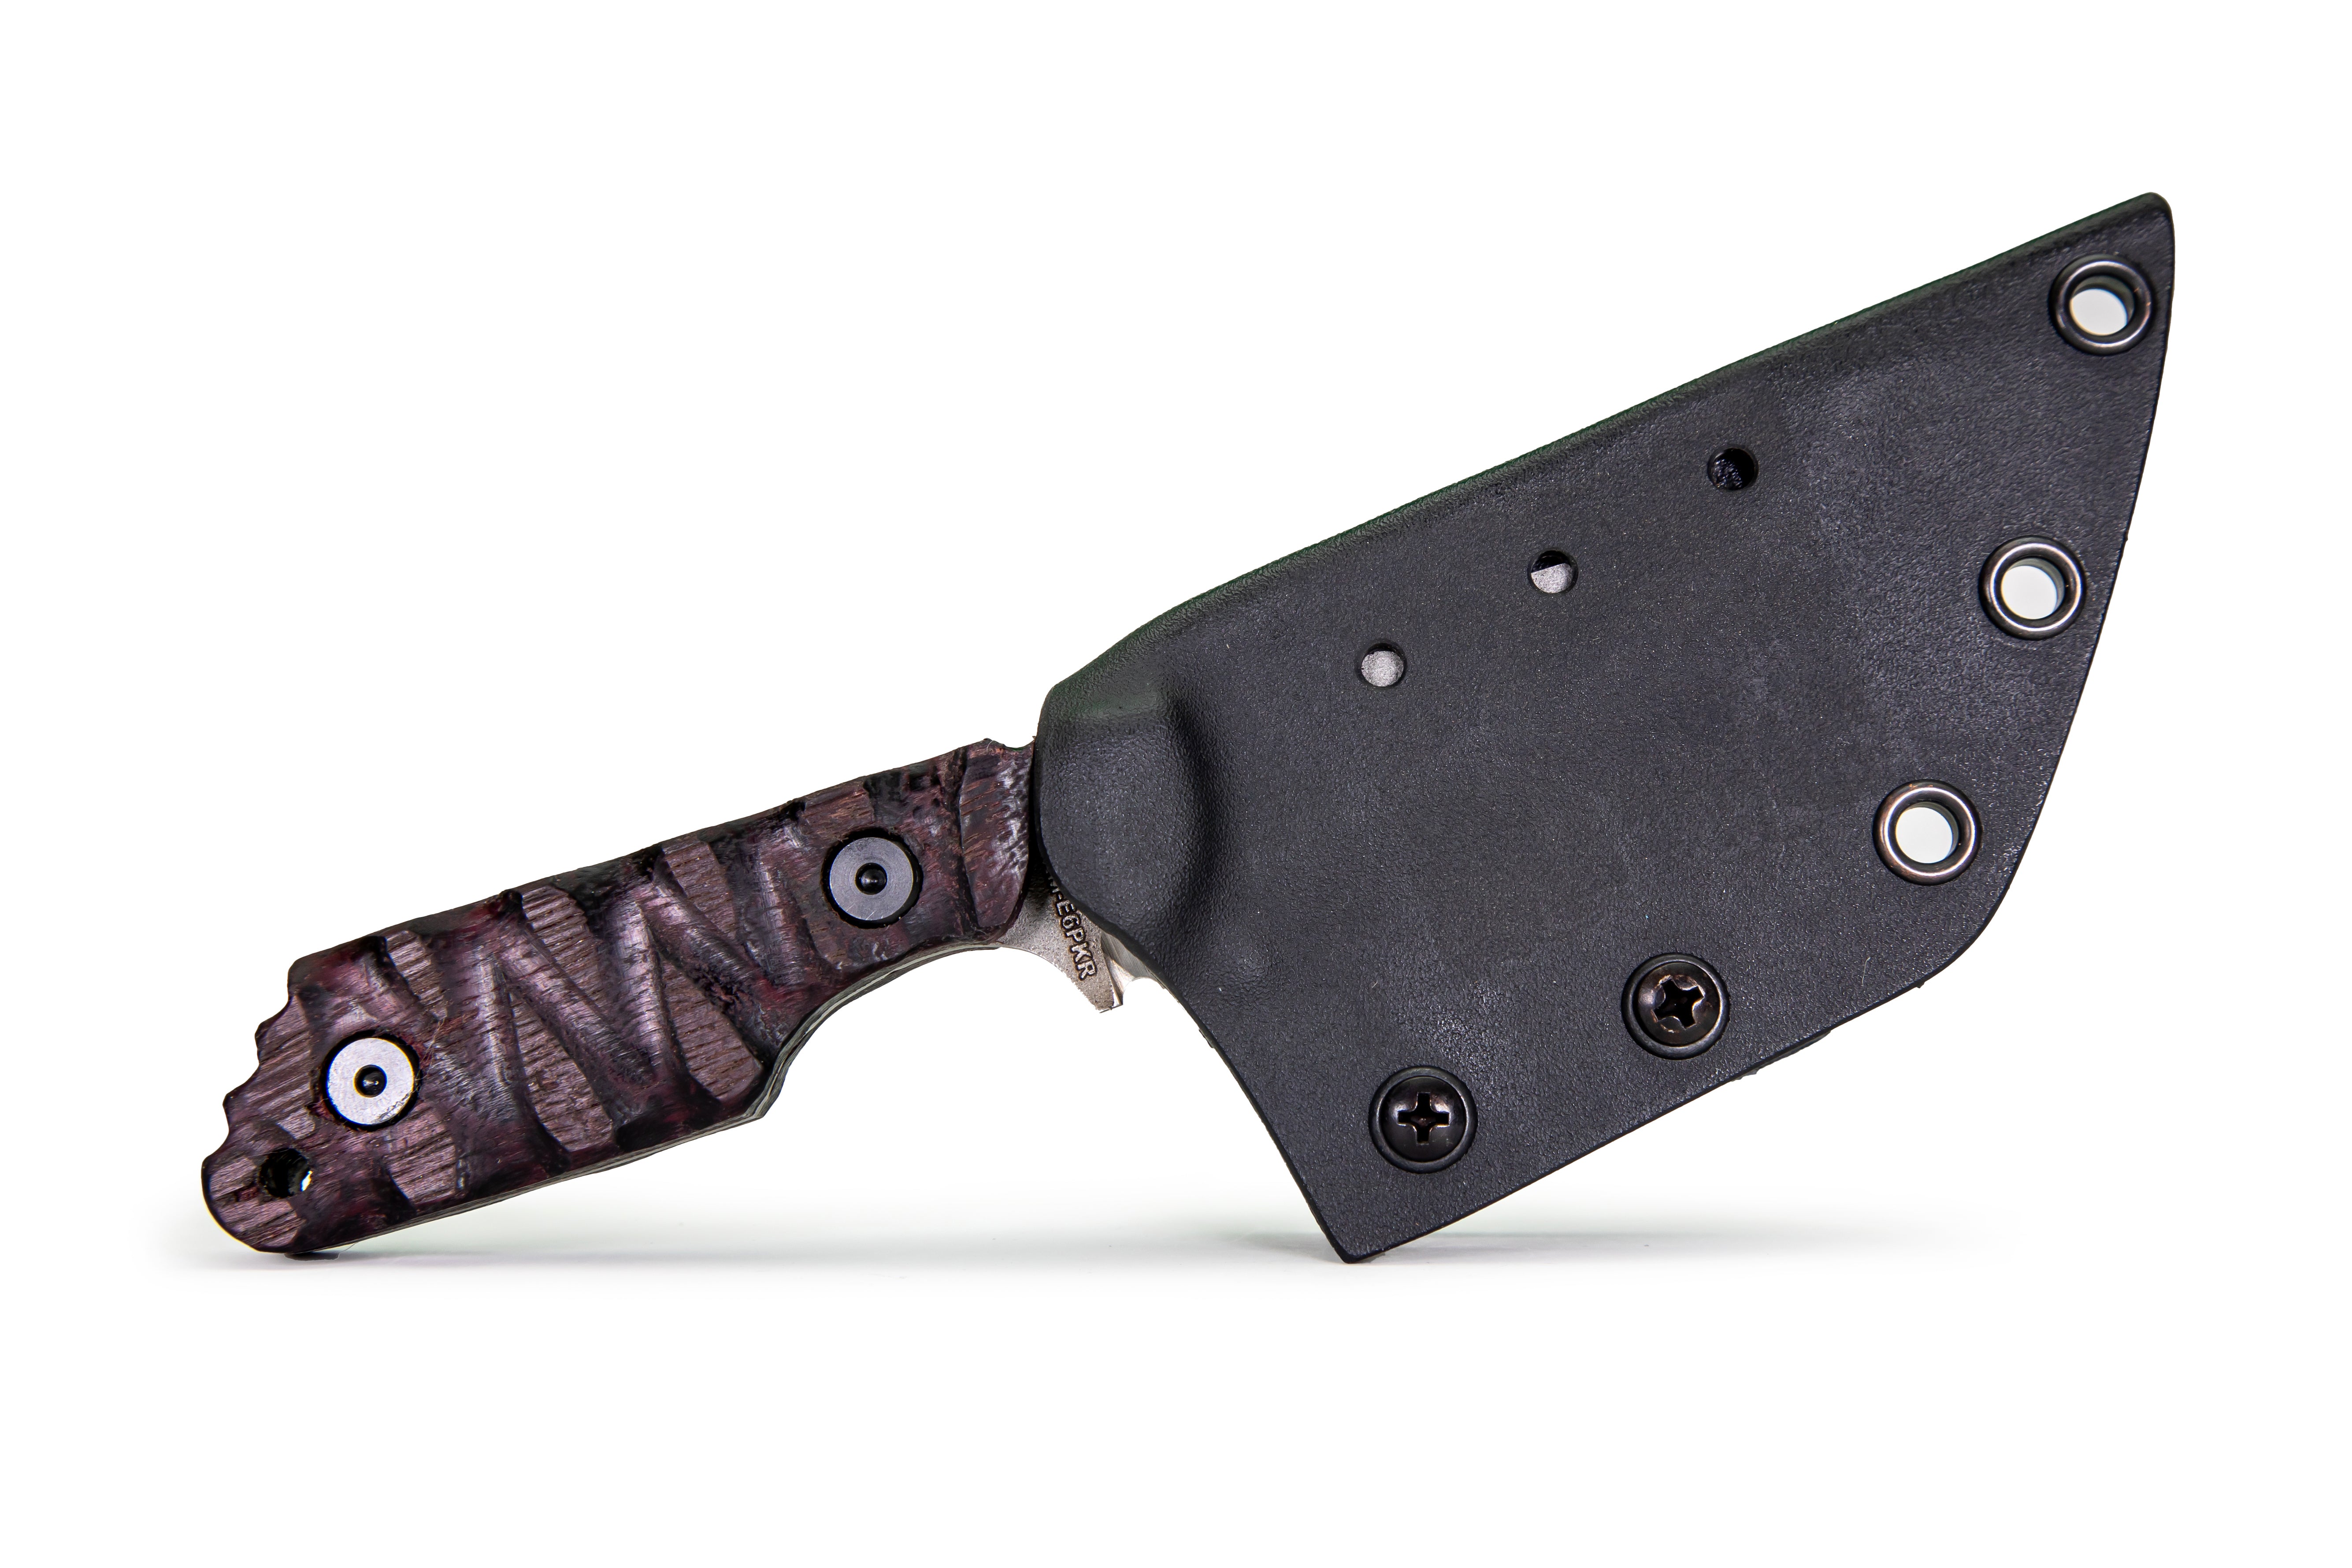 Tommy Knife® Echo with Purpleheart Wood Caveman Grip - Right Grind